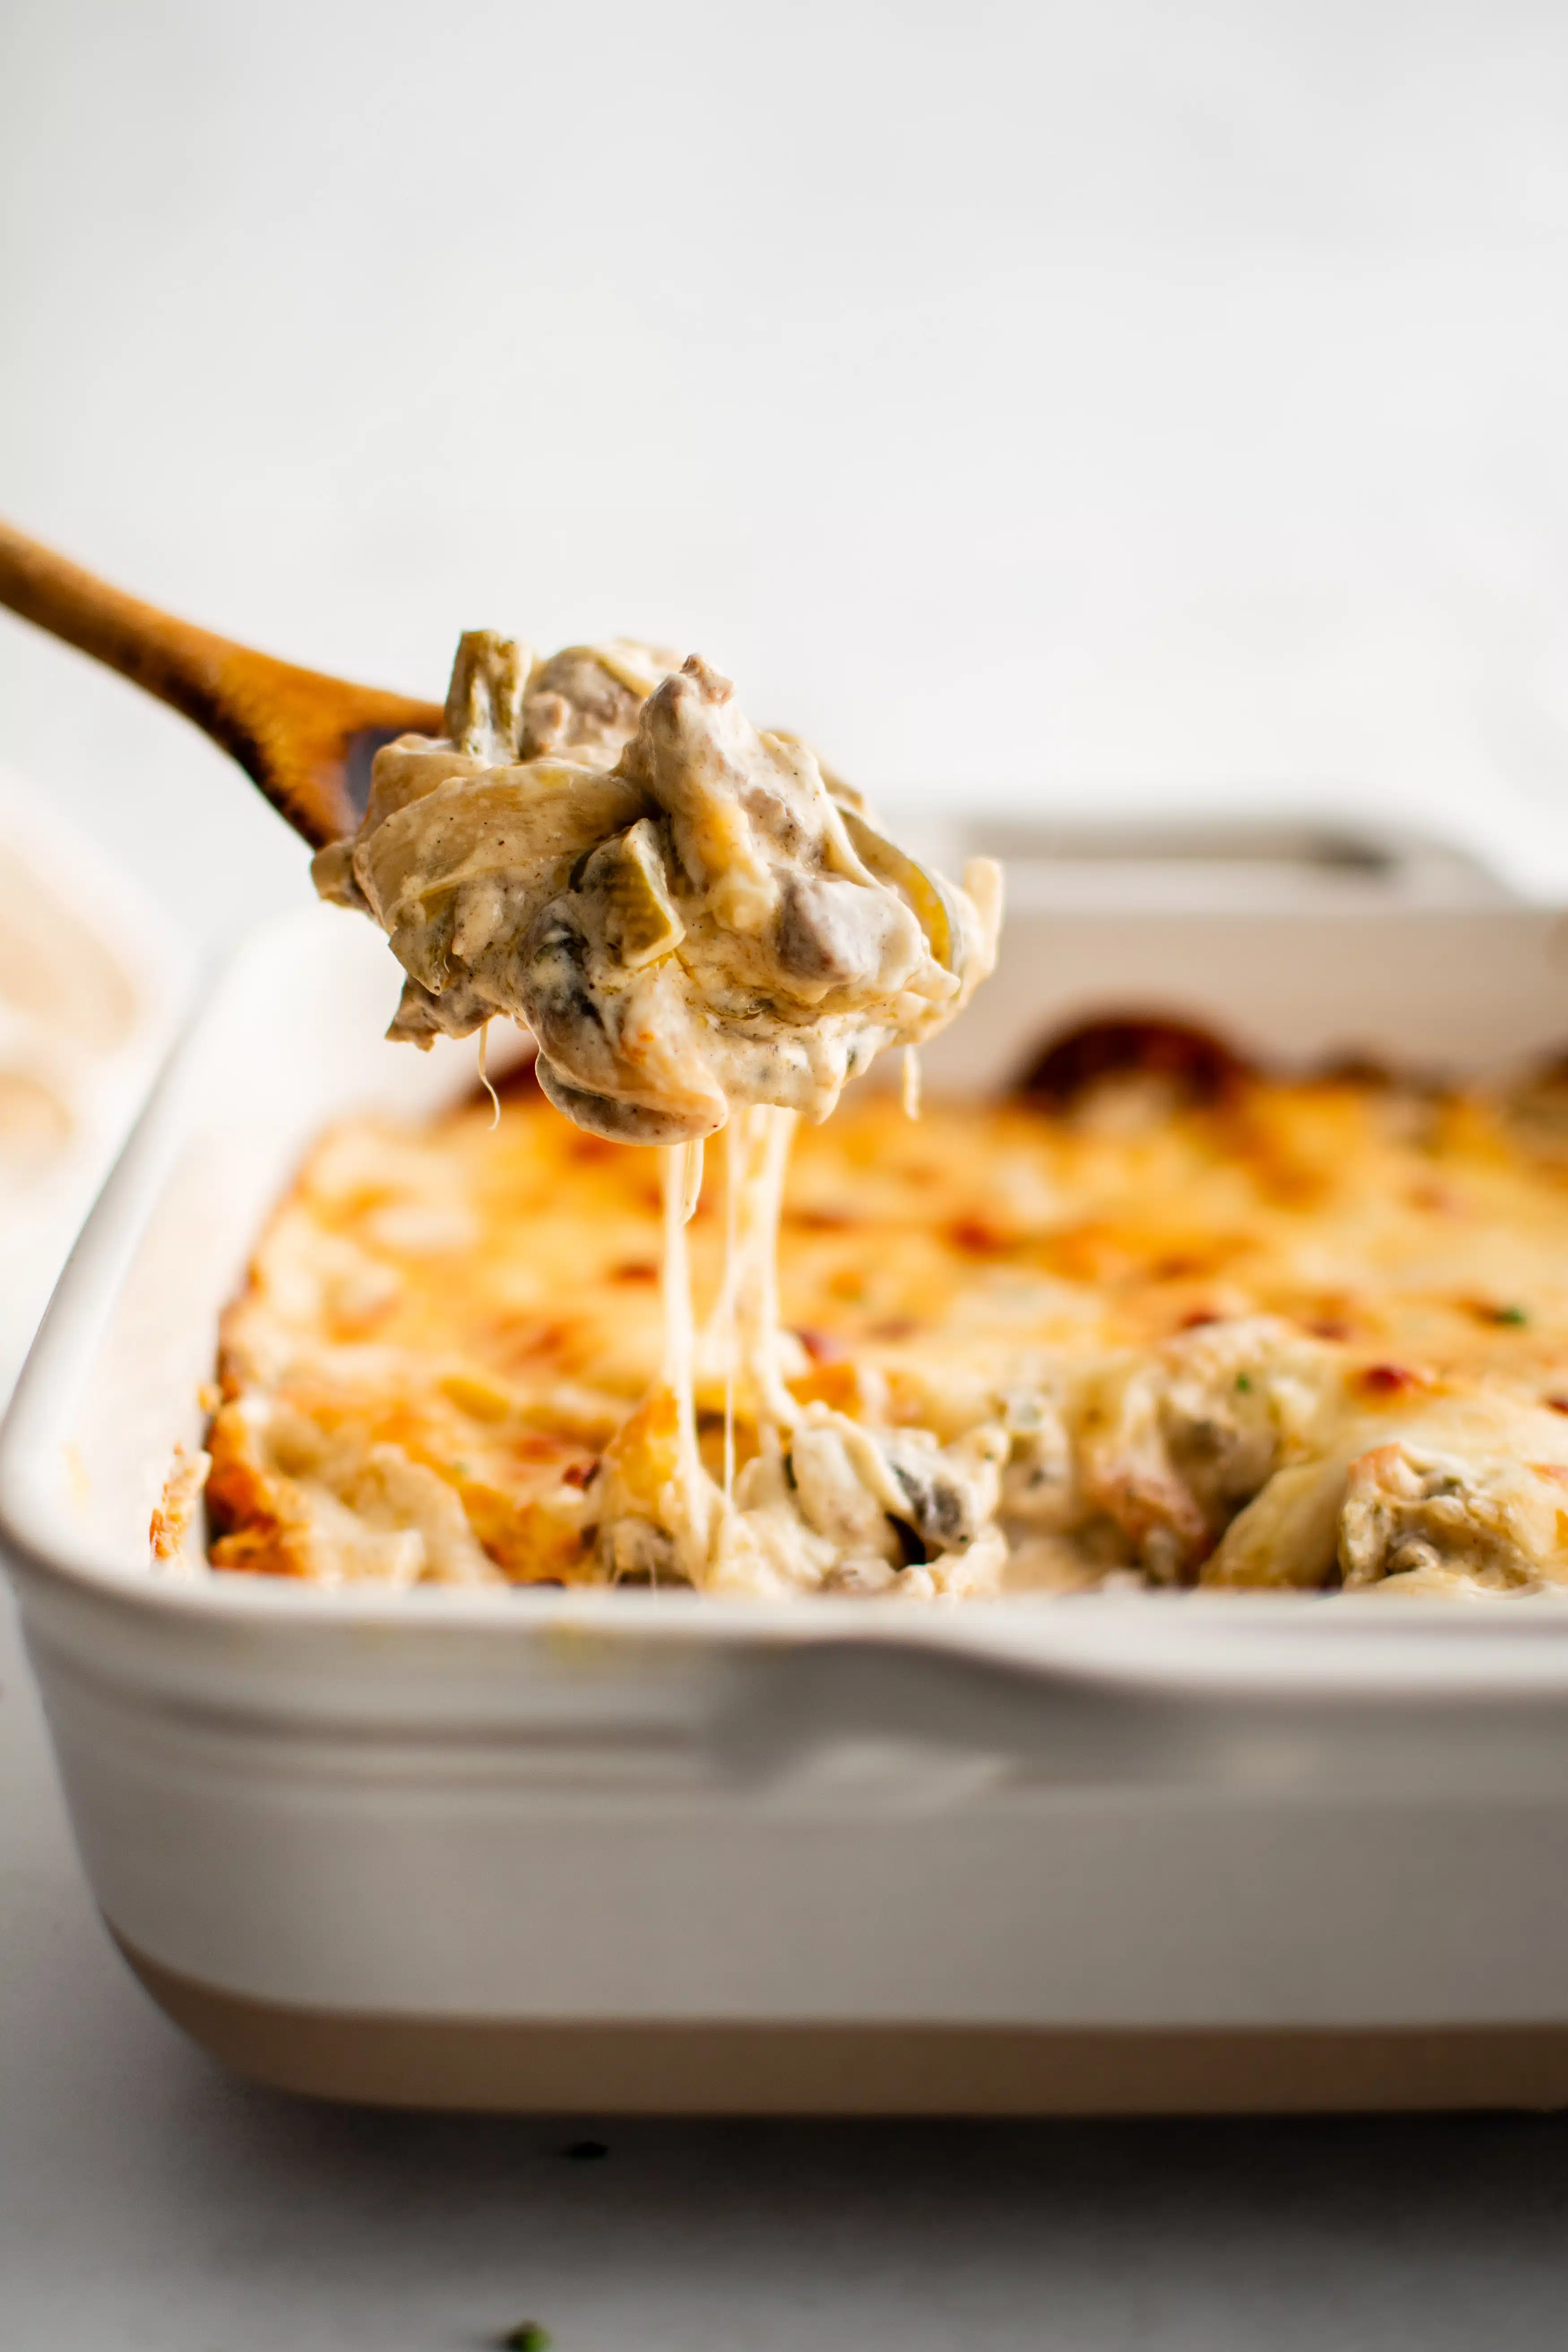 Large wooden spoon filled with Philly cheesesteak casserole hovering above a large casserole dish filled with philly cheesesteak casserole covered in gooey melted cheese.